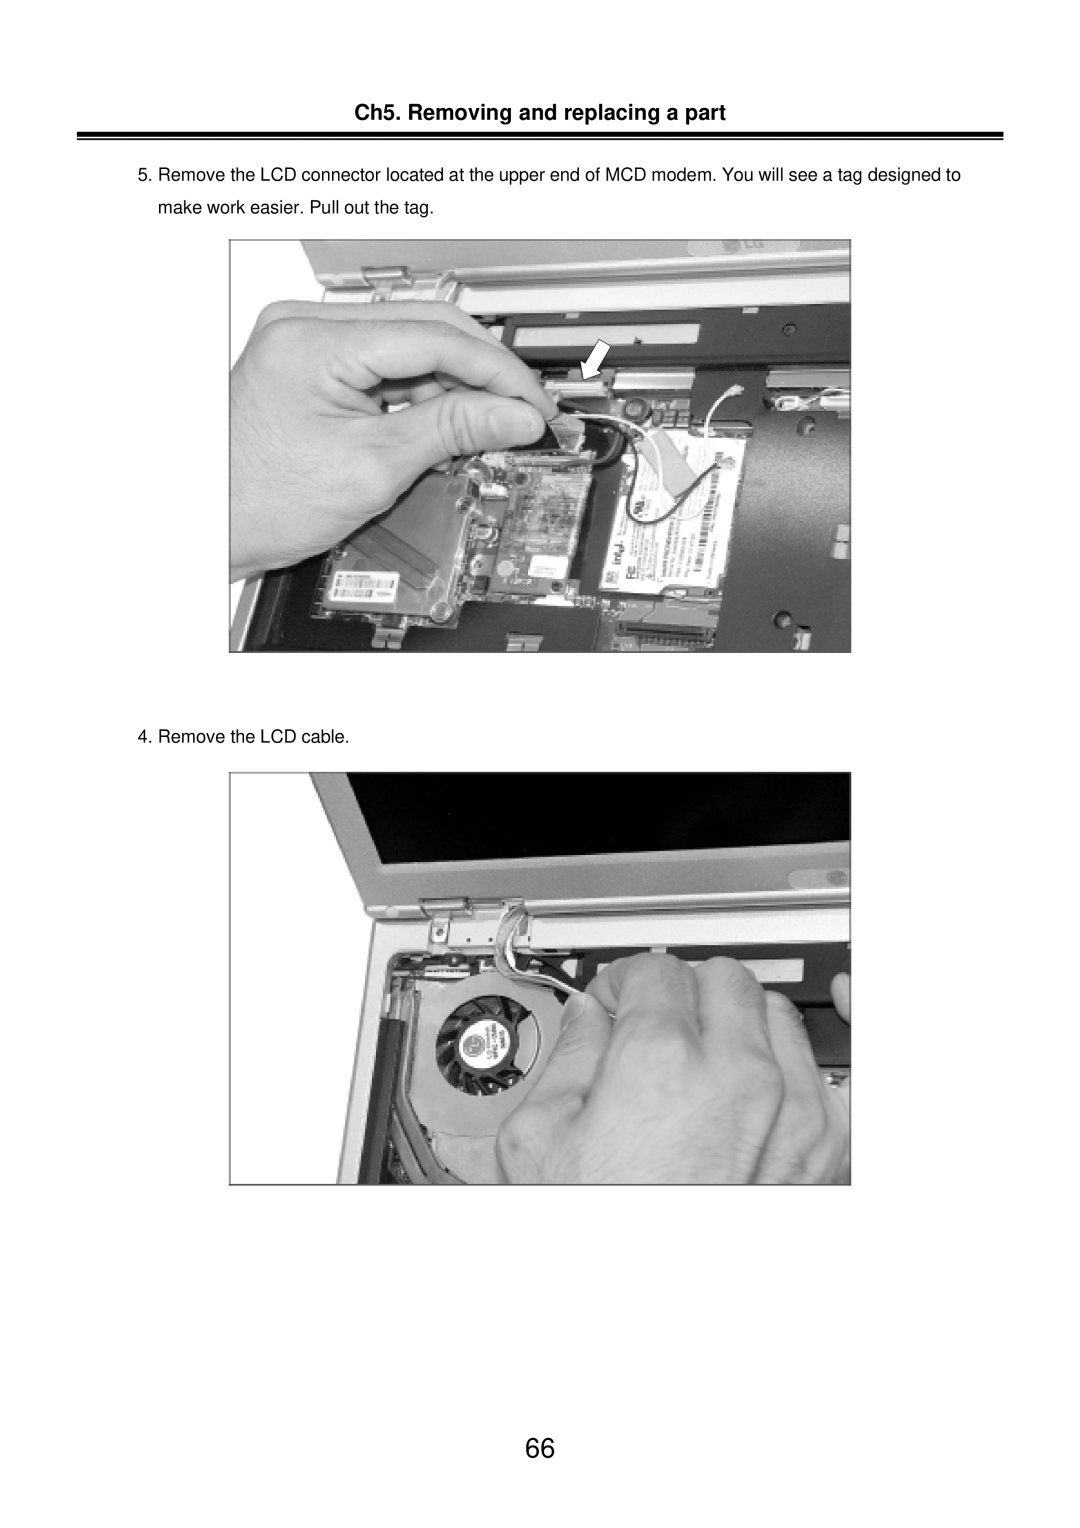 LG Electronics LM50 service manual Ch5. Removing and replacing a part, Remove the LCD cable 